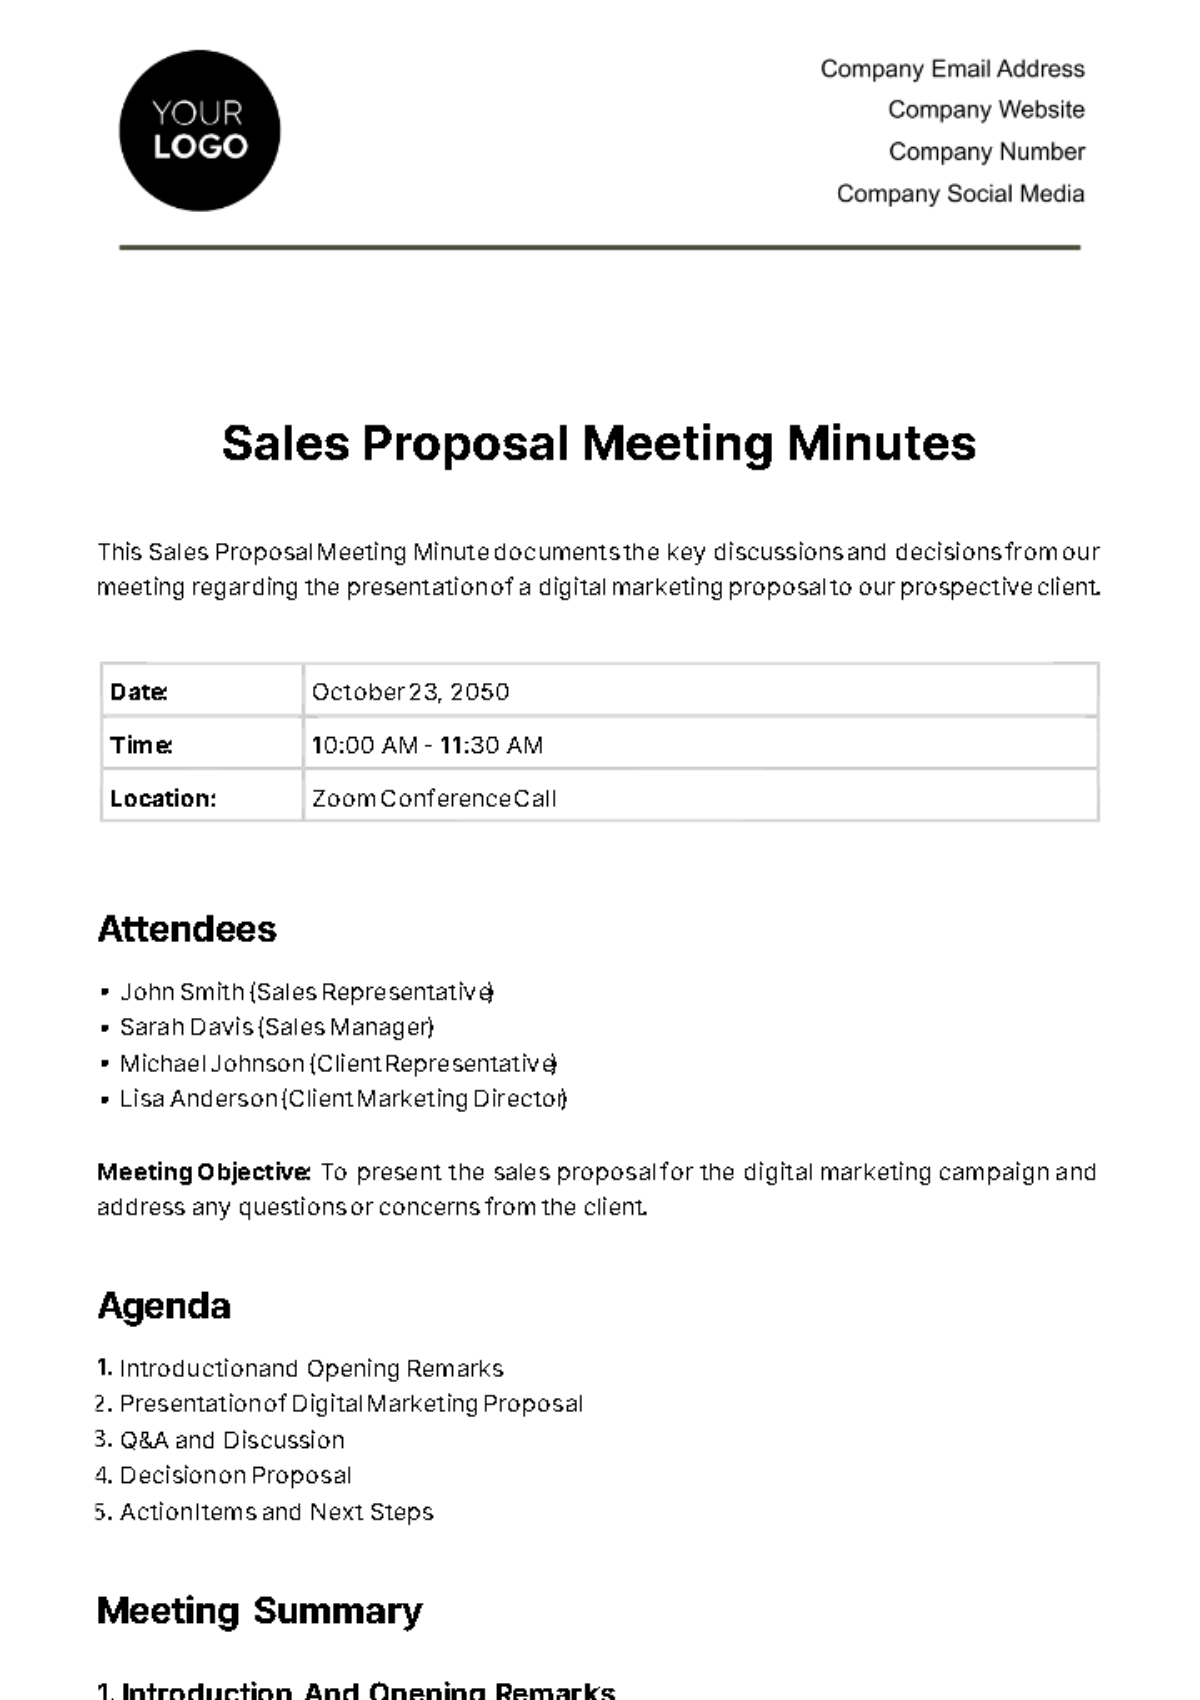 Sales Proposal Meeting Minute Template